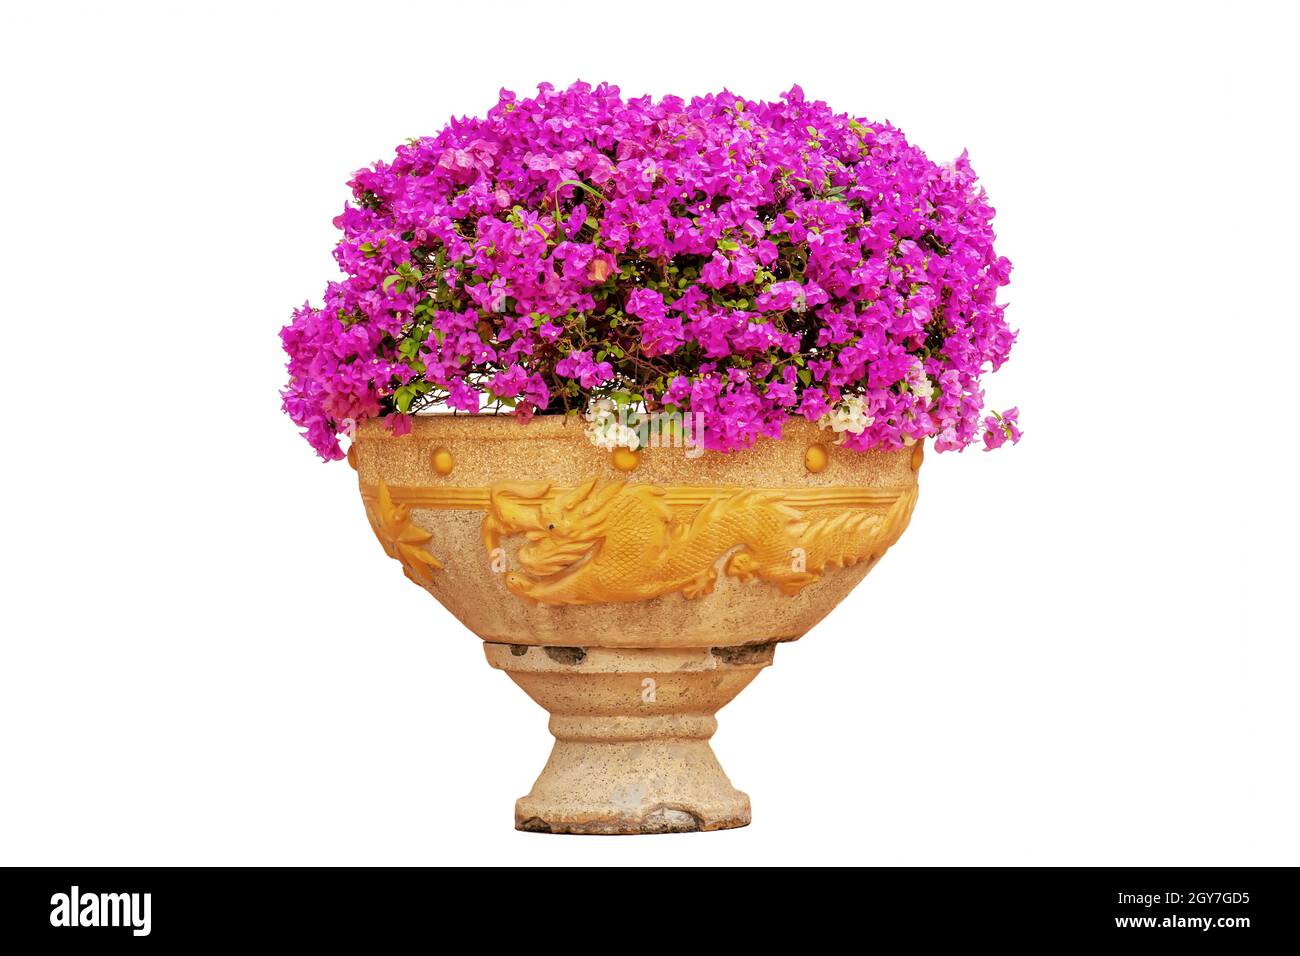 The pink bougainvillea in a flowerpot on a white background. Stock Photo